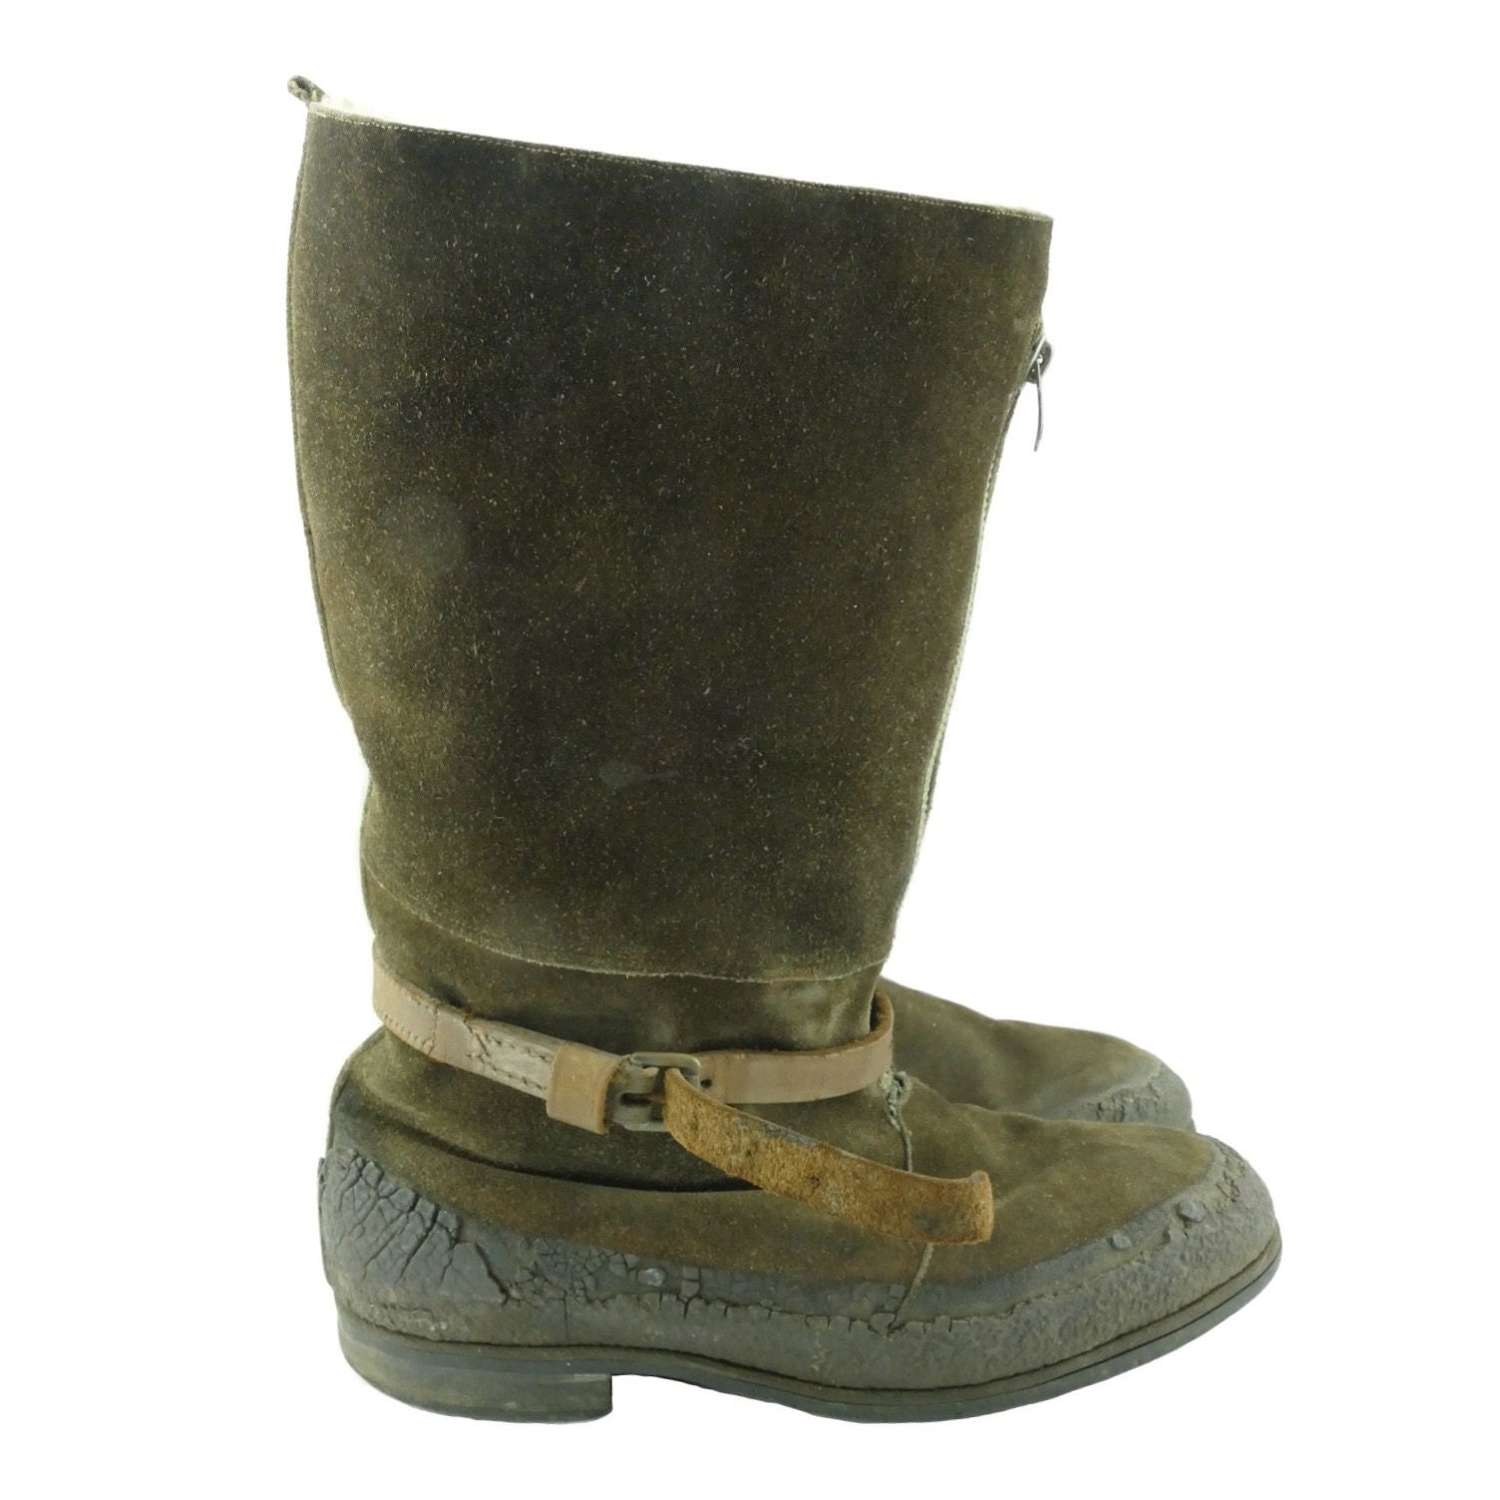 RAF 1941 pattern flying boots, S7